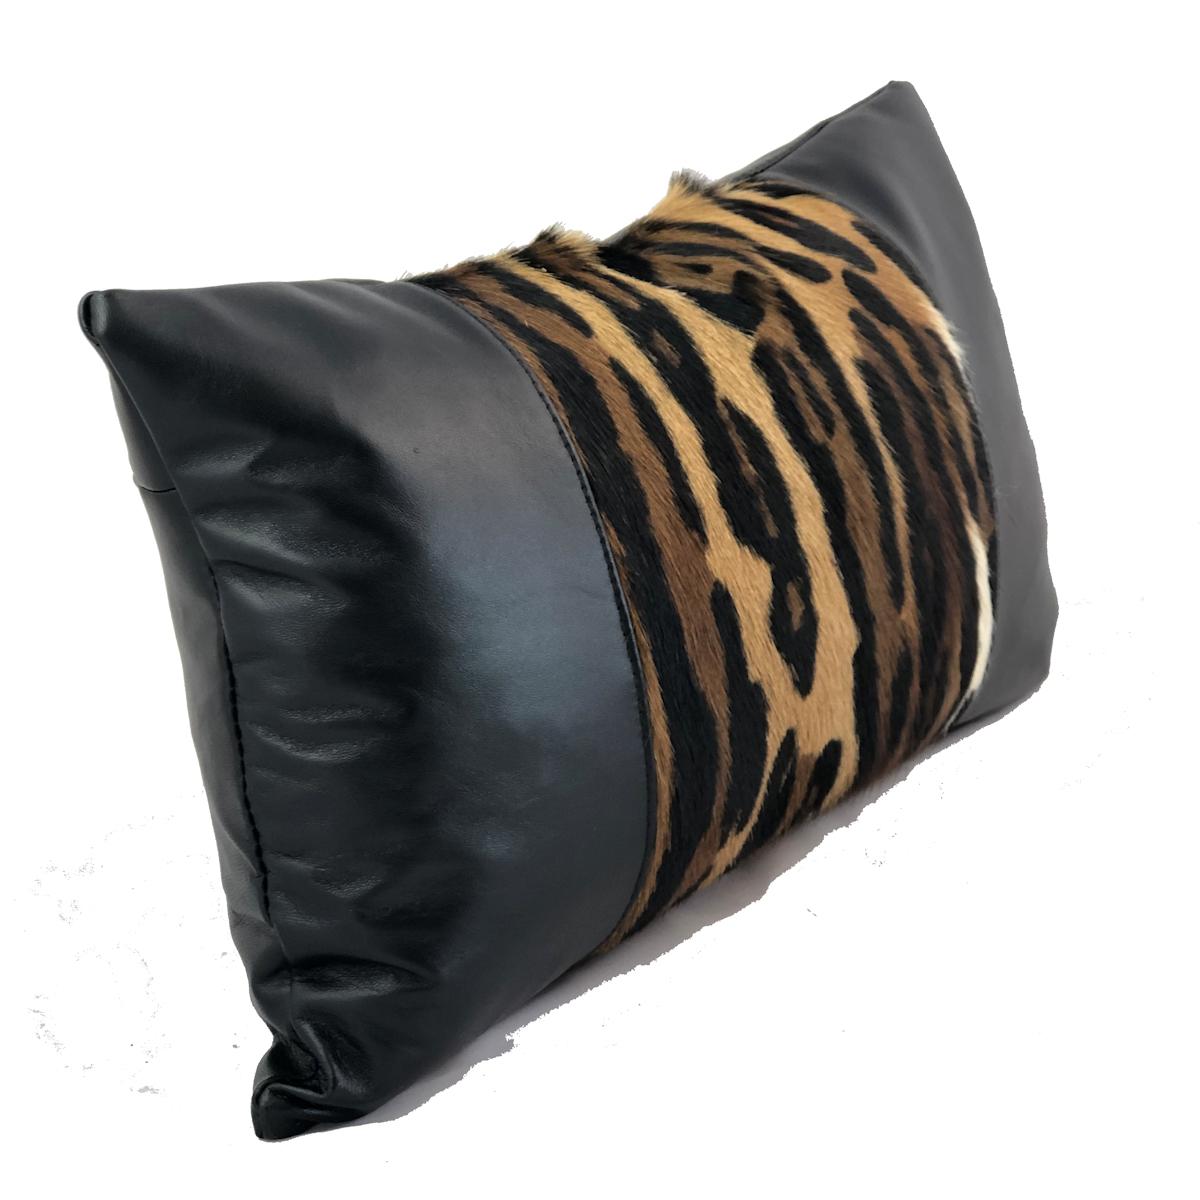 It's the season of the exotic and wild leopard prints, so let your interiors be set free with this ostentatious leopard print lumbar pillow. A beautiful designed print, screen printed over an African Springbok fur capturing incredible rich and